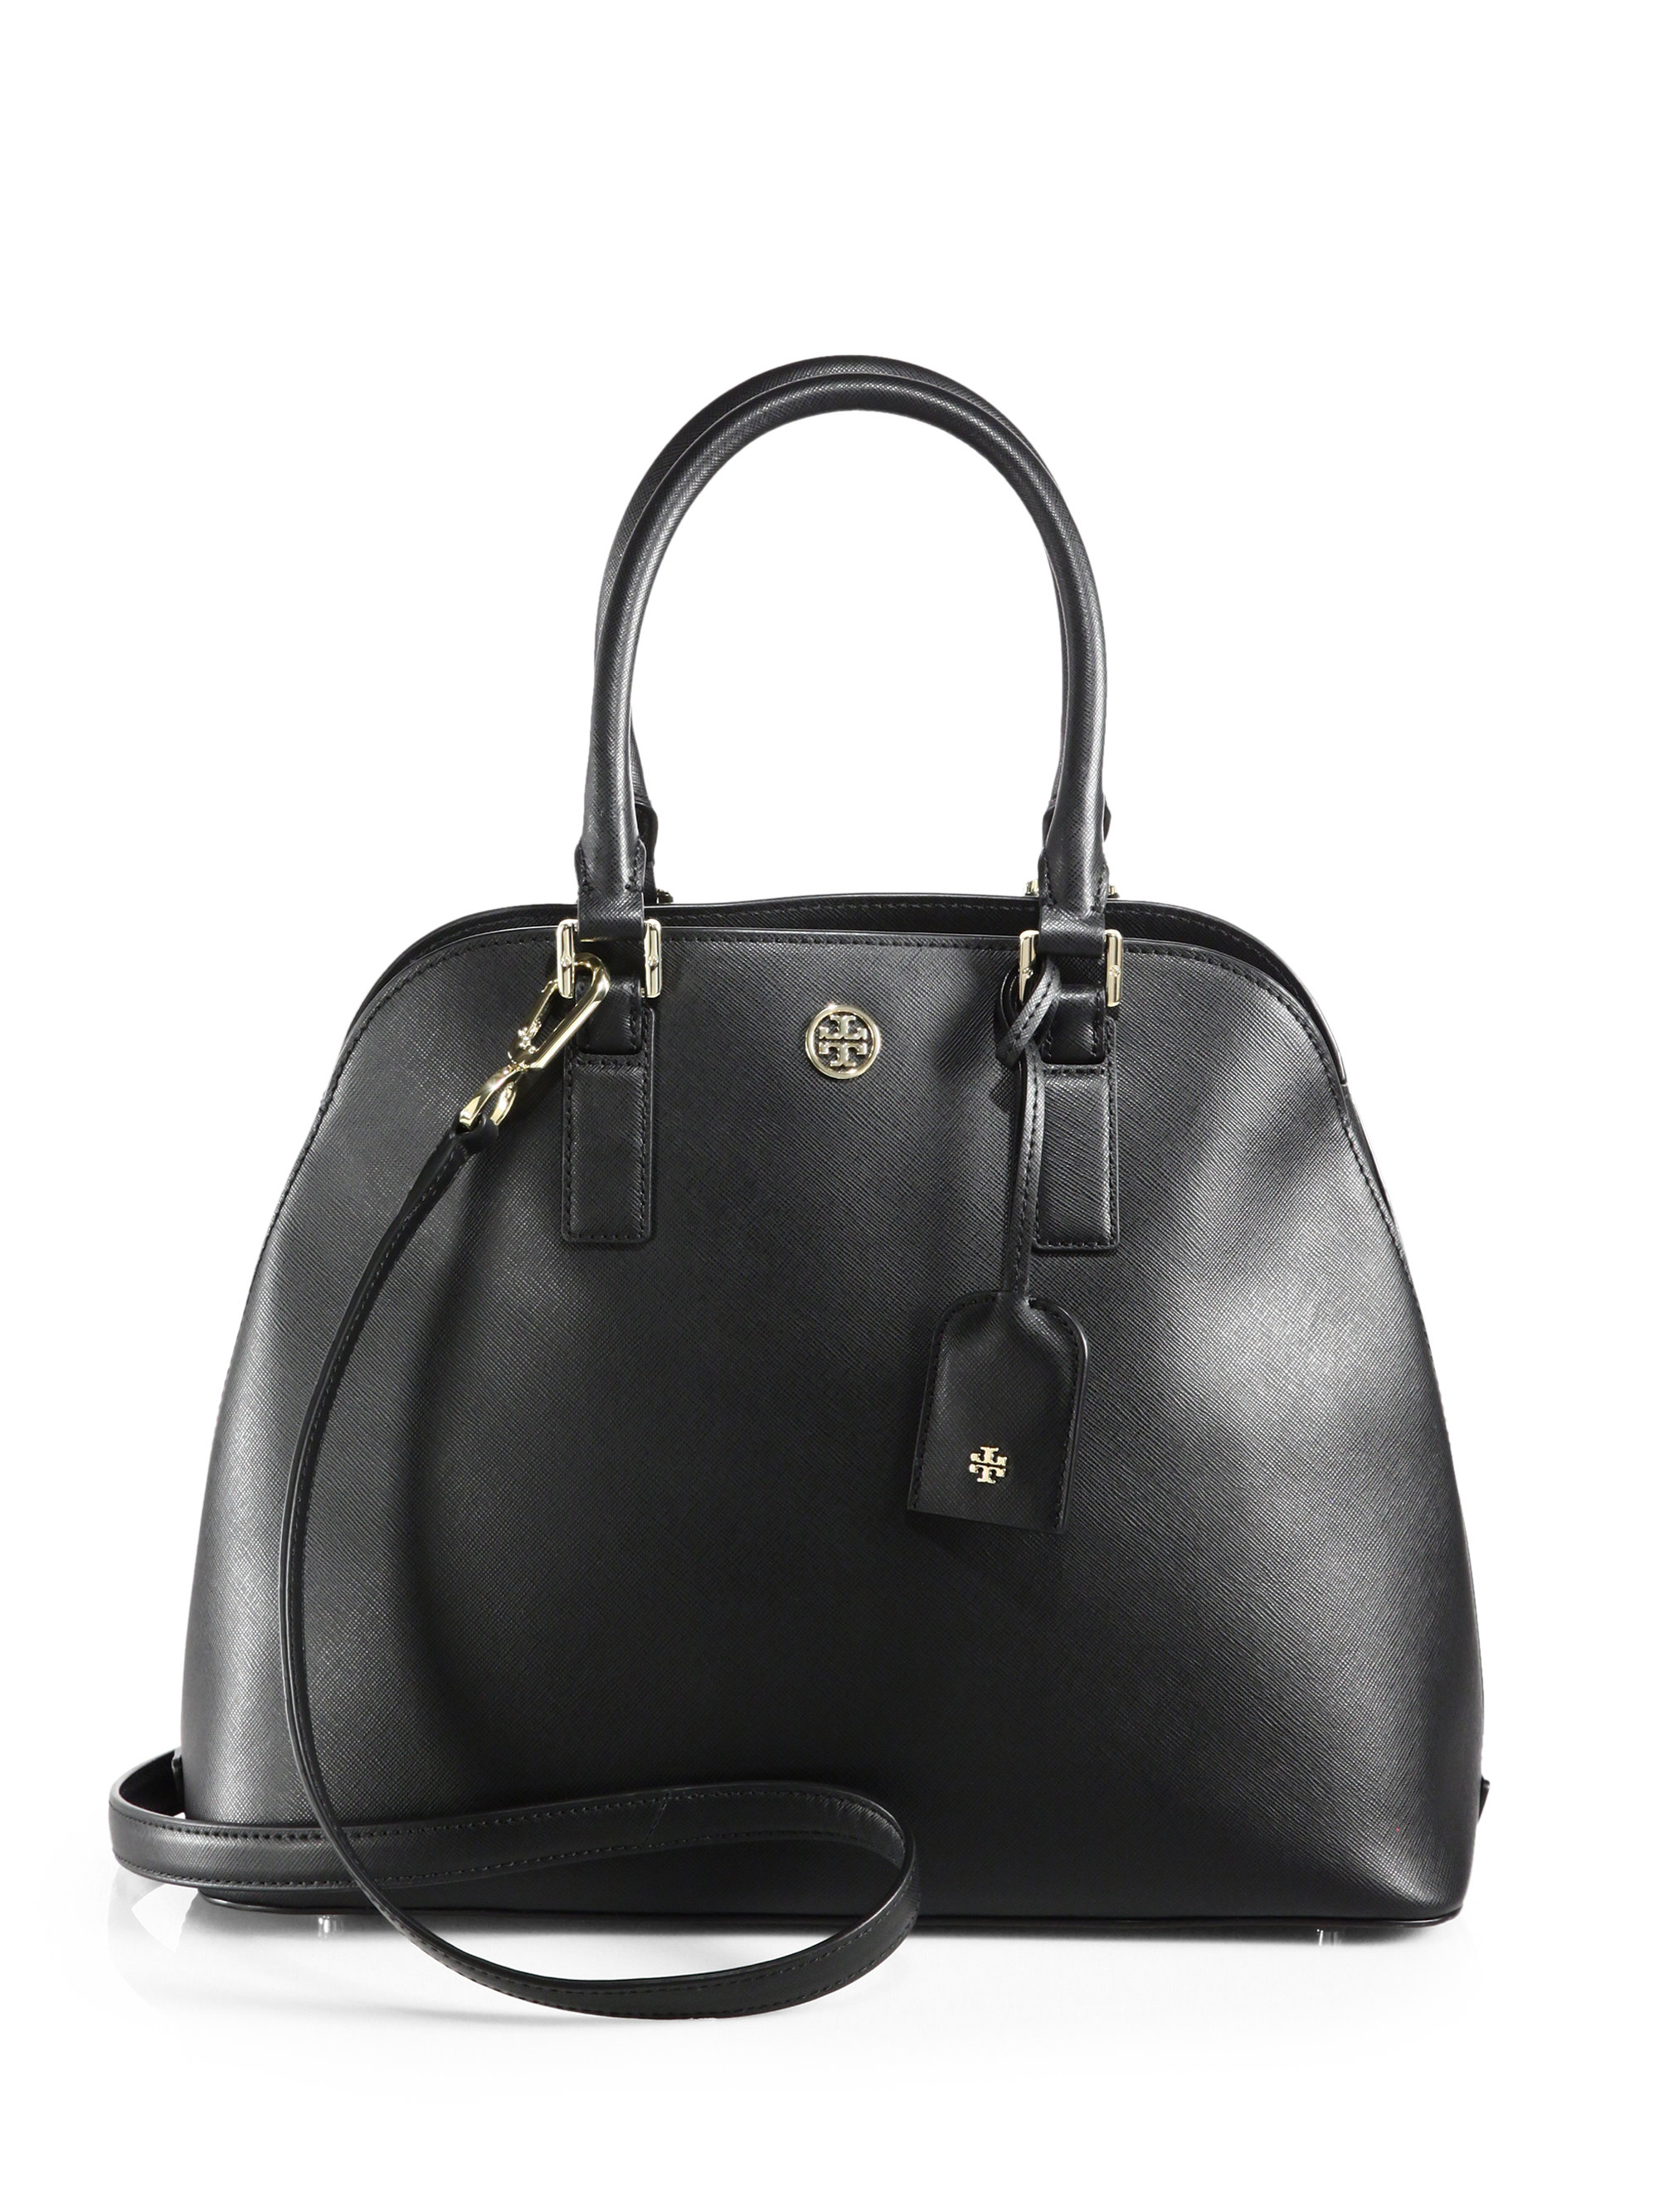 Tory Burch Robinson Saffiano Leather Open Dome Satchel in Black | Lyst